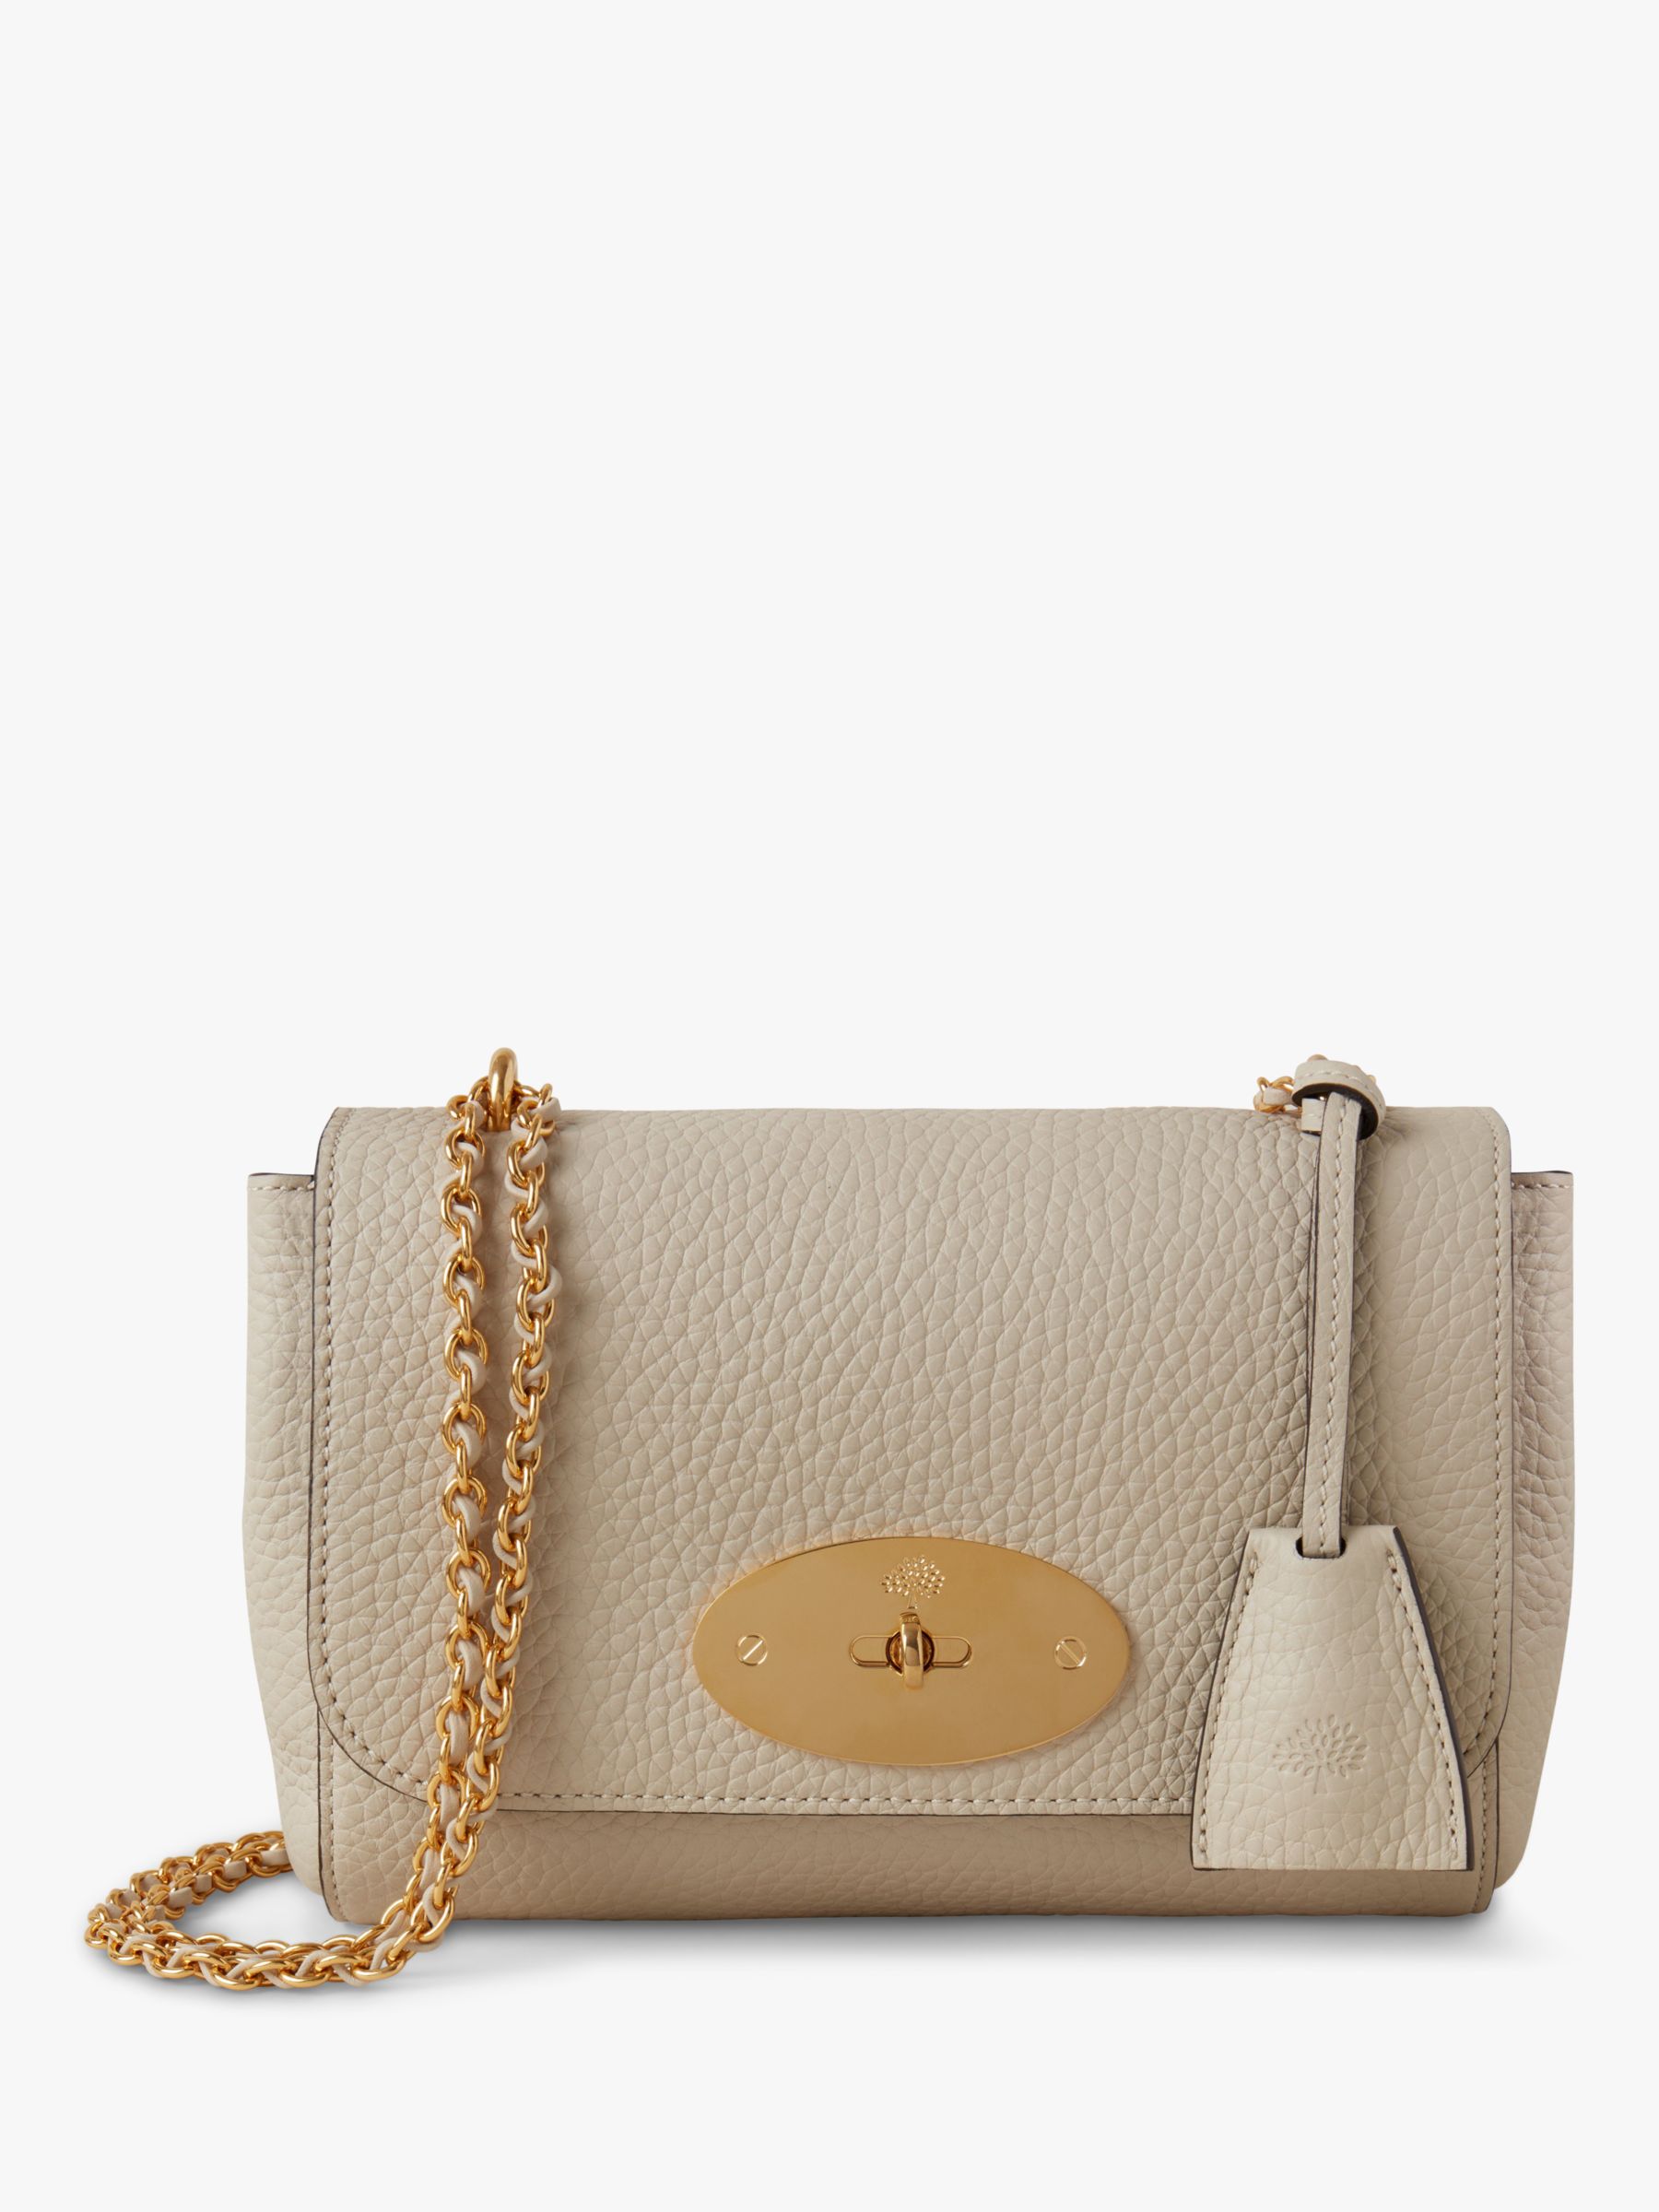 Mulberry Lily Crossbody Bag - Green